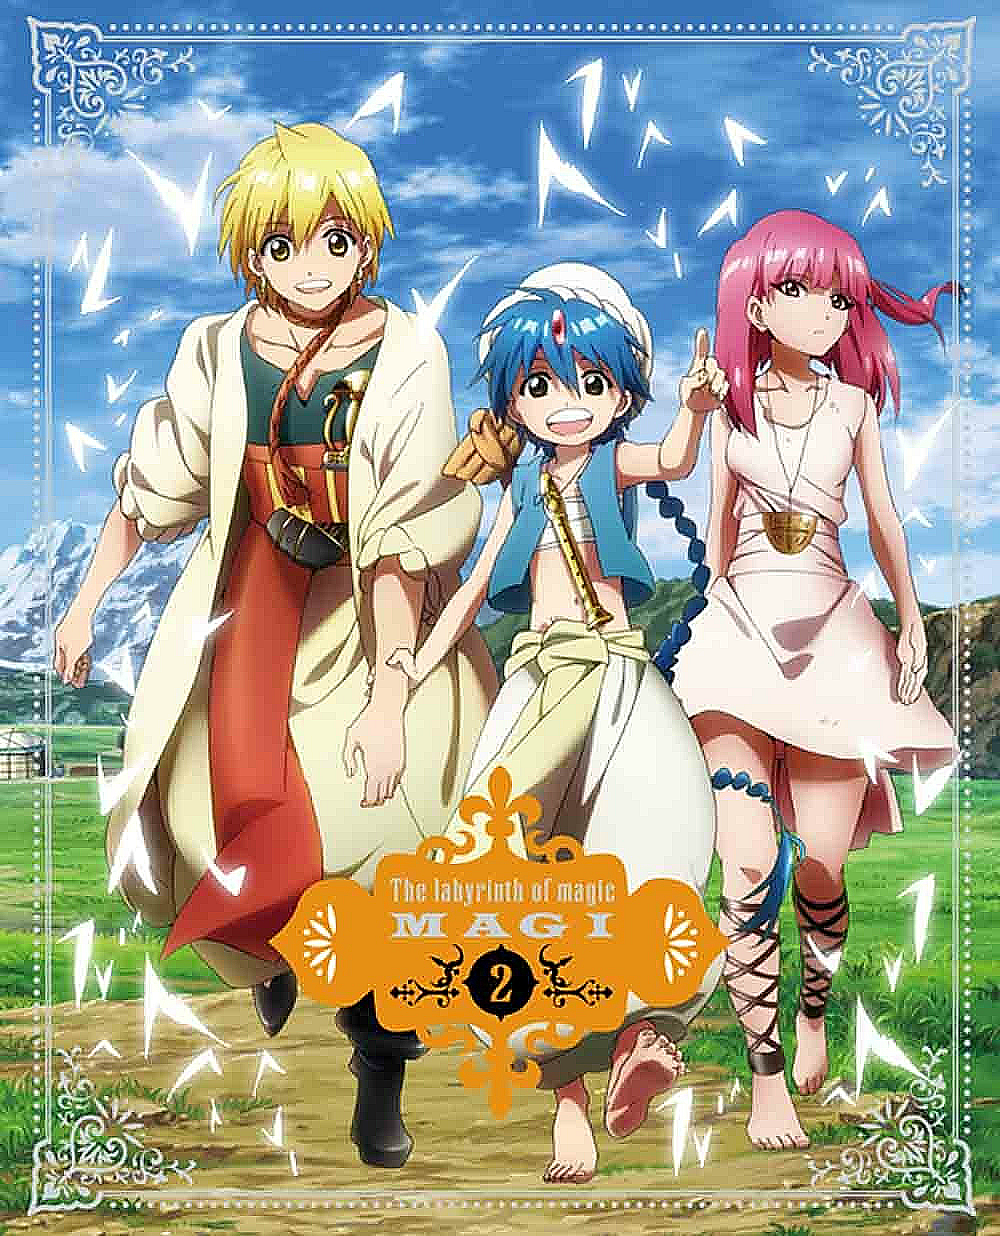 What's a Magi in 'Magi: The Labyrinth of Magic' and What Are Their